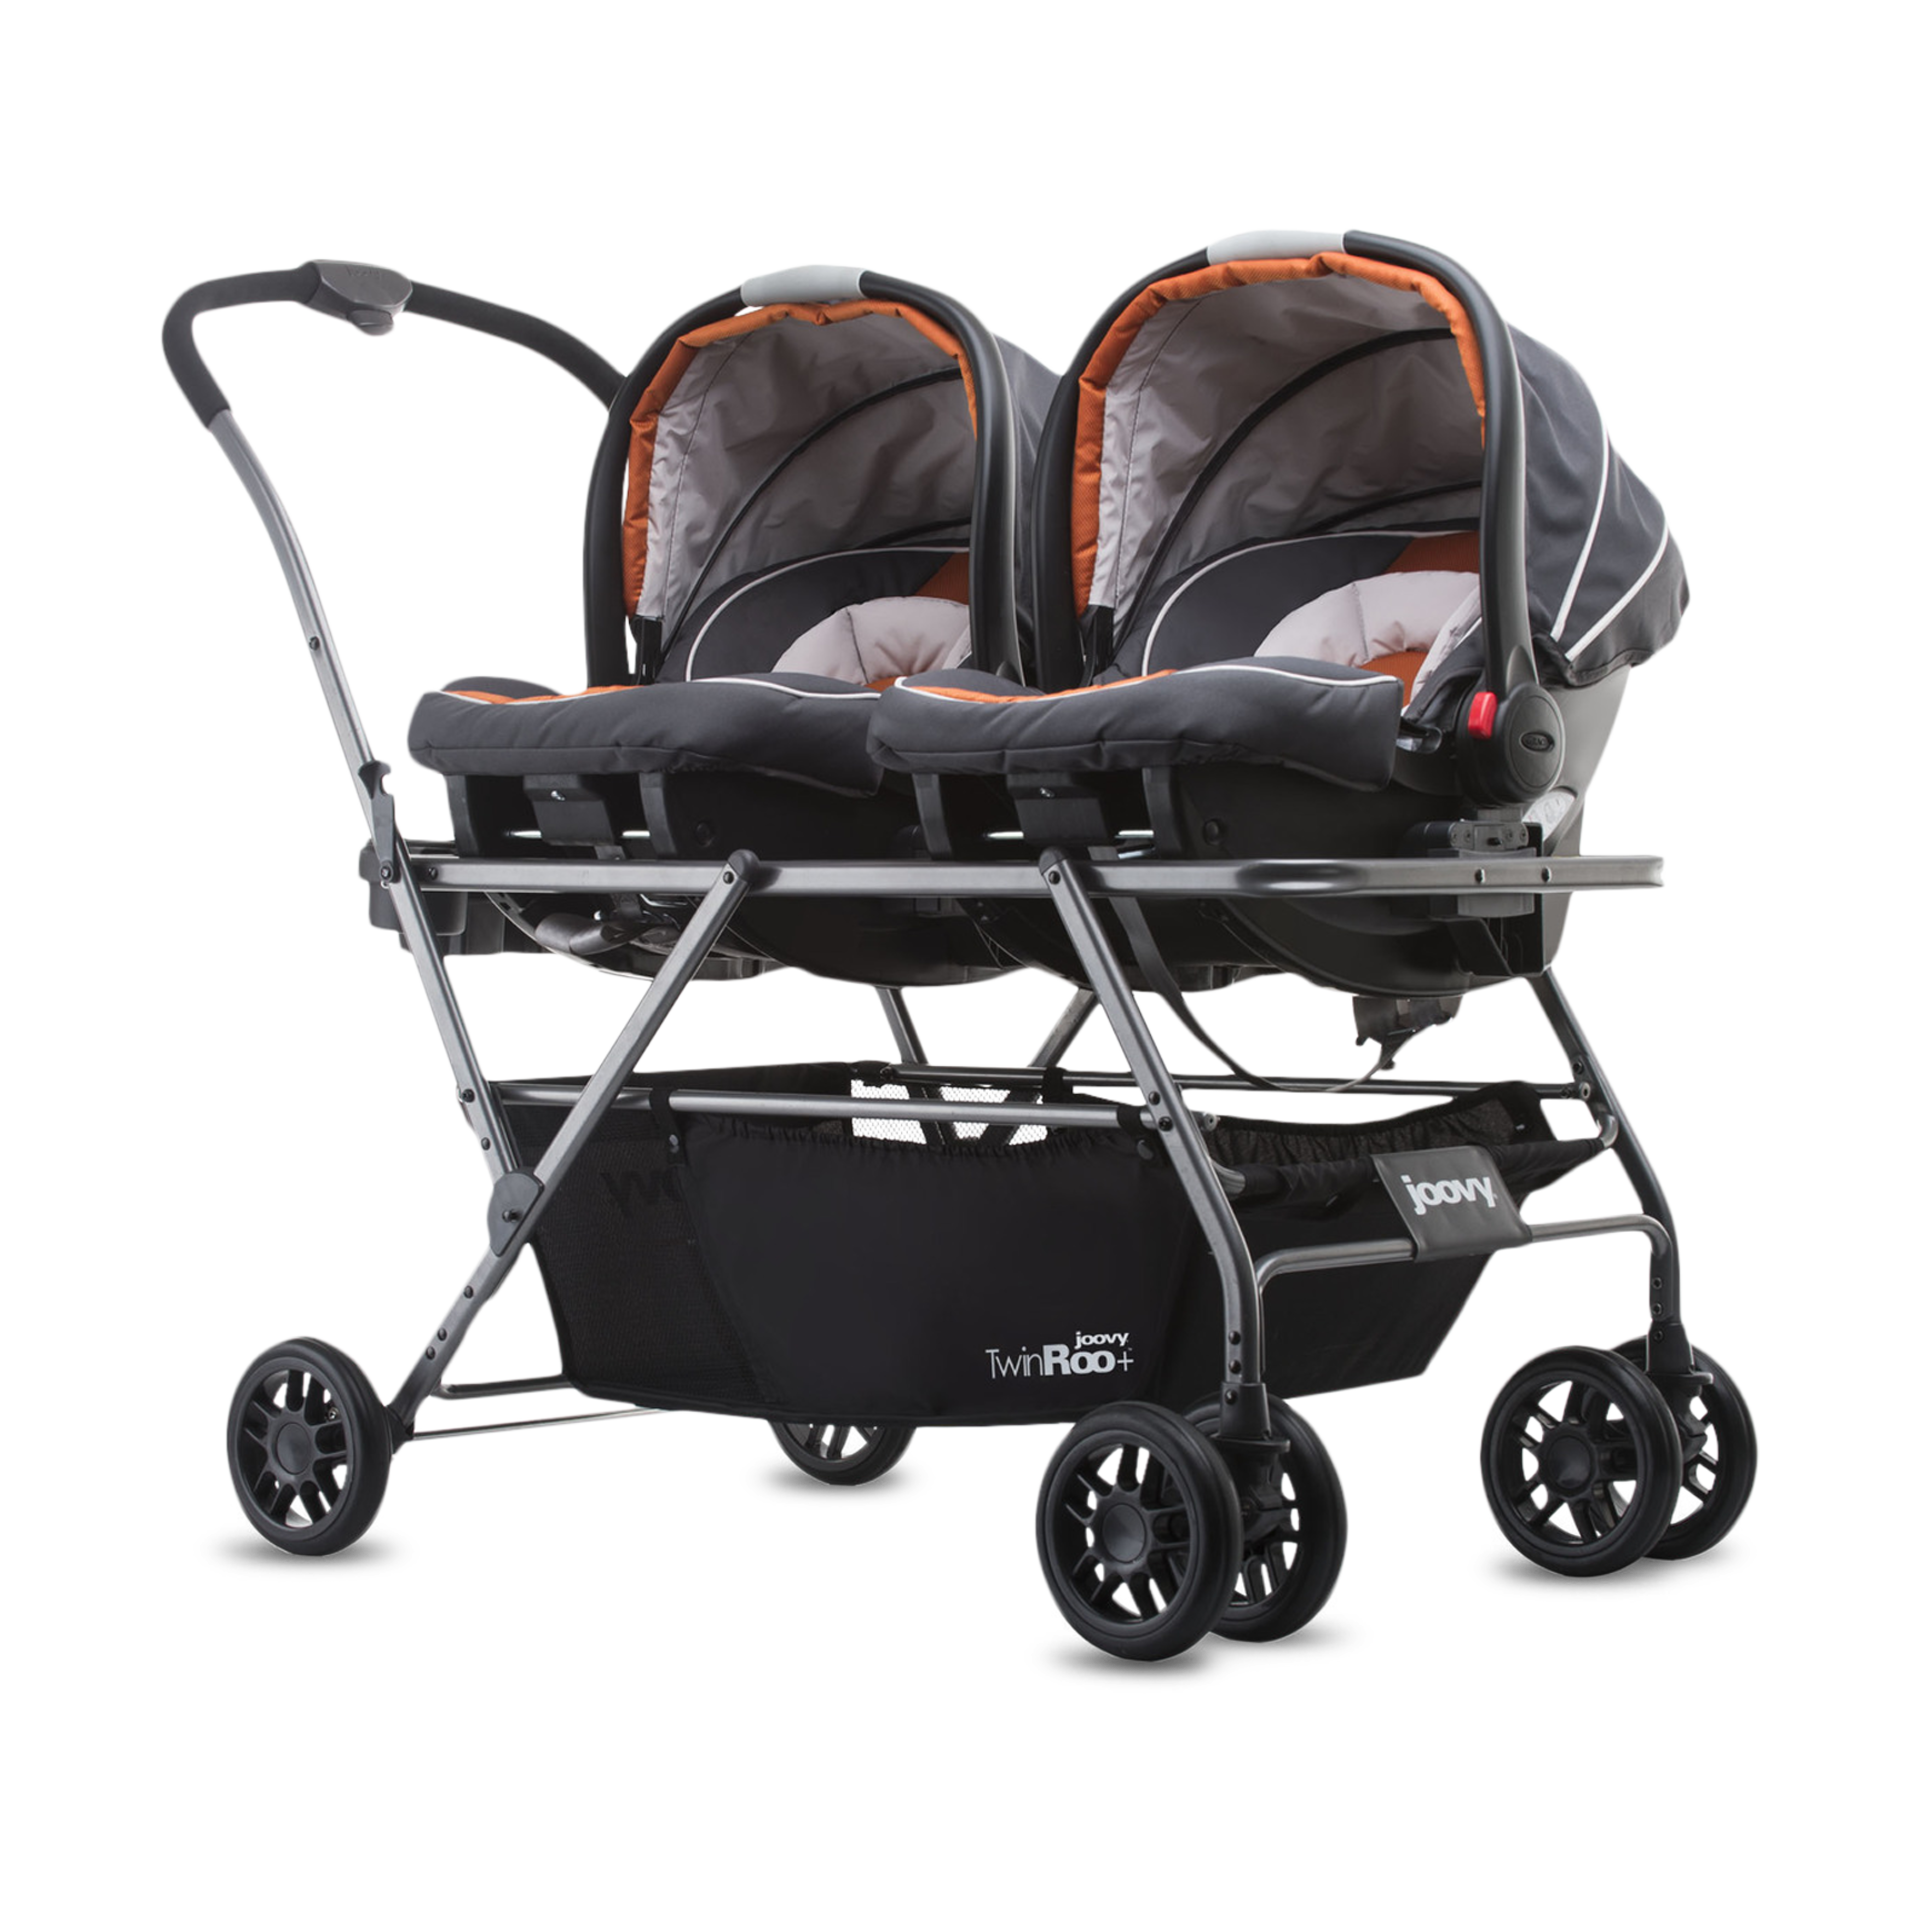 twin baby strollers with car seats